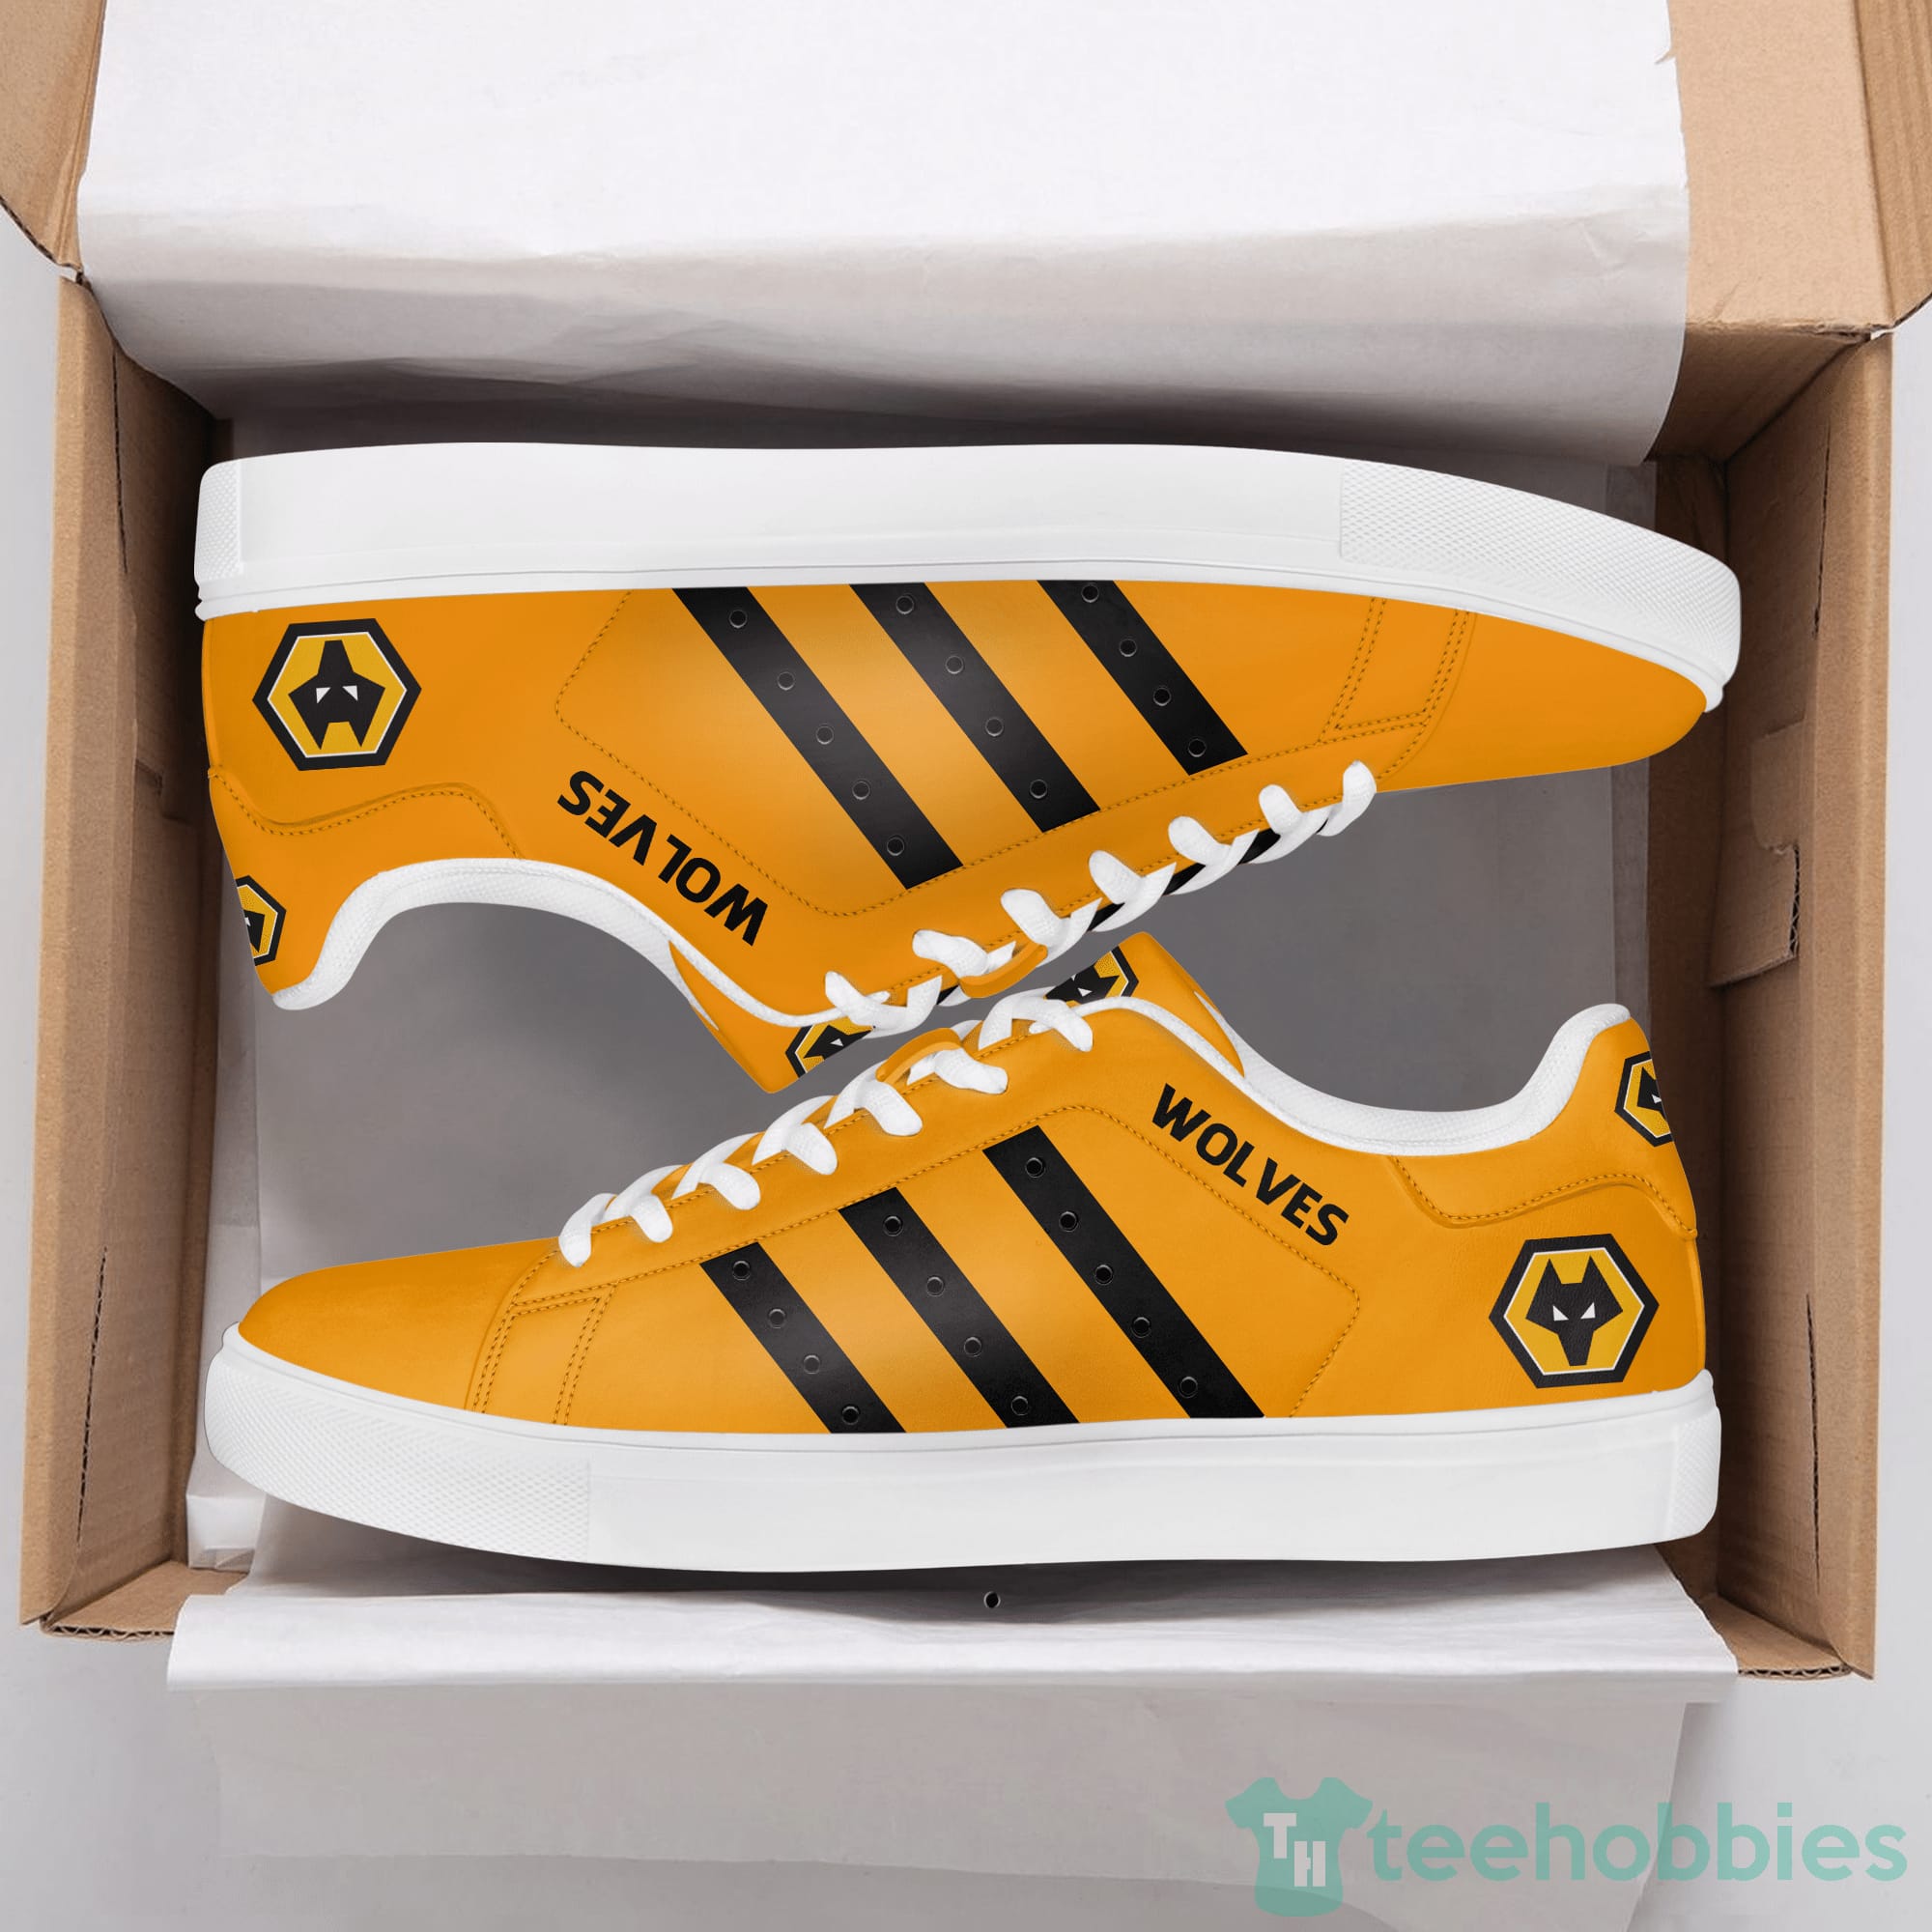 Wolerhampton Wanderers For Fans Low Top Skate Shoes